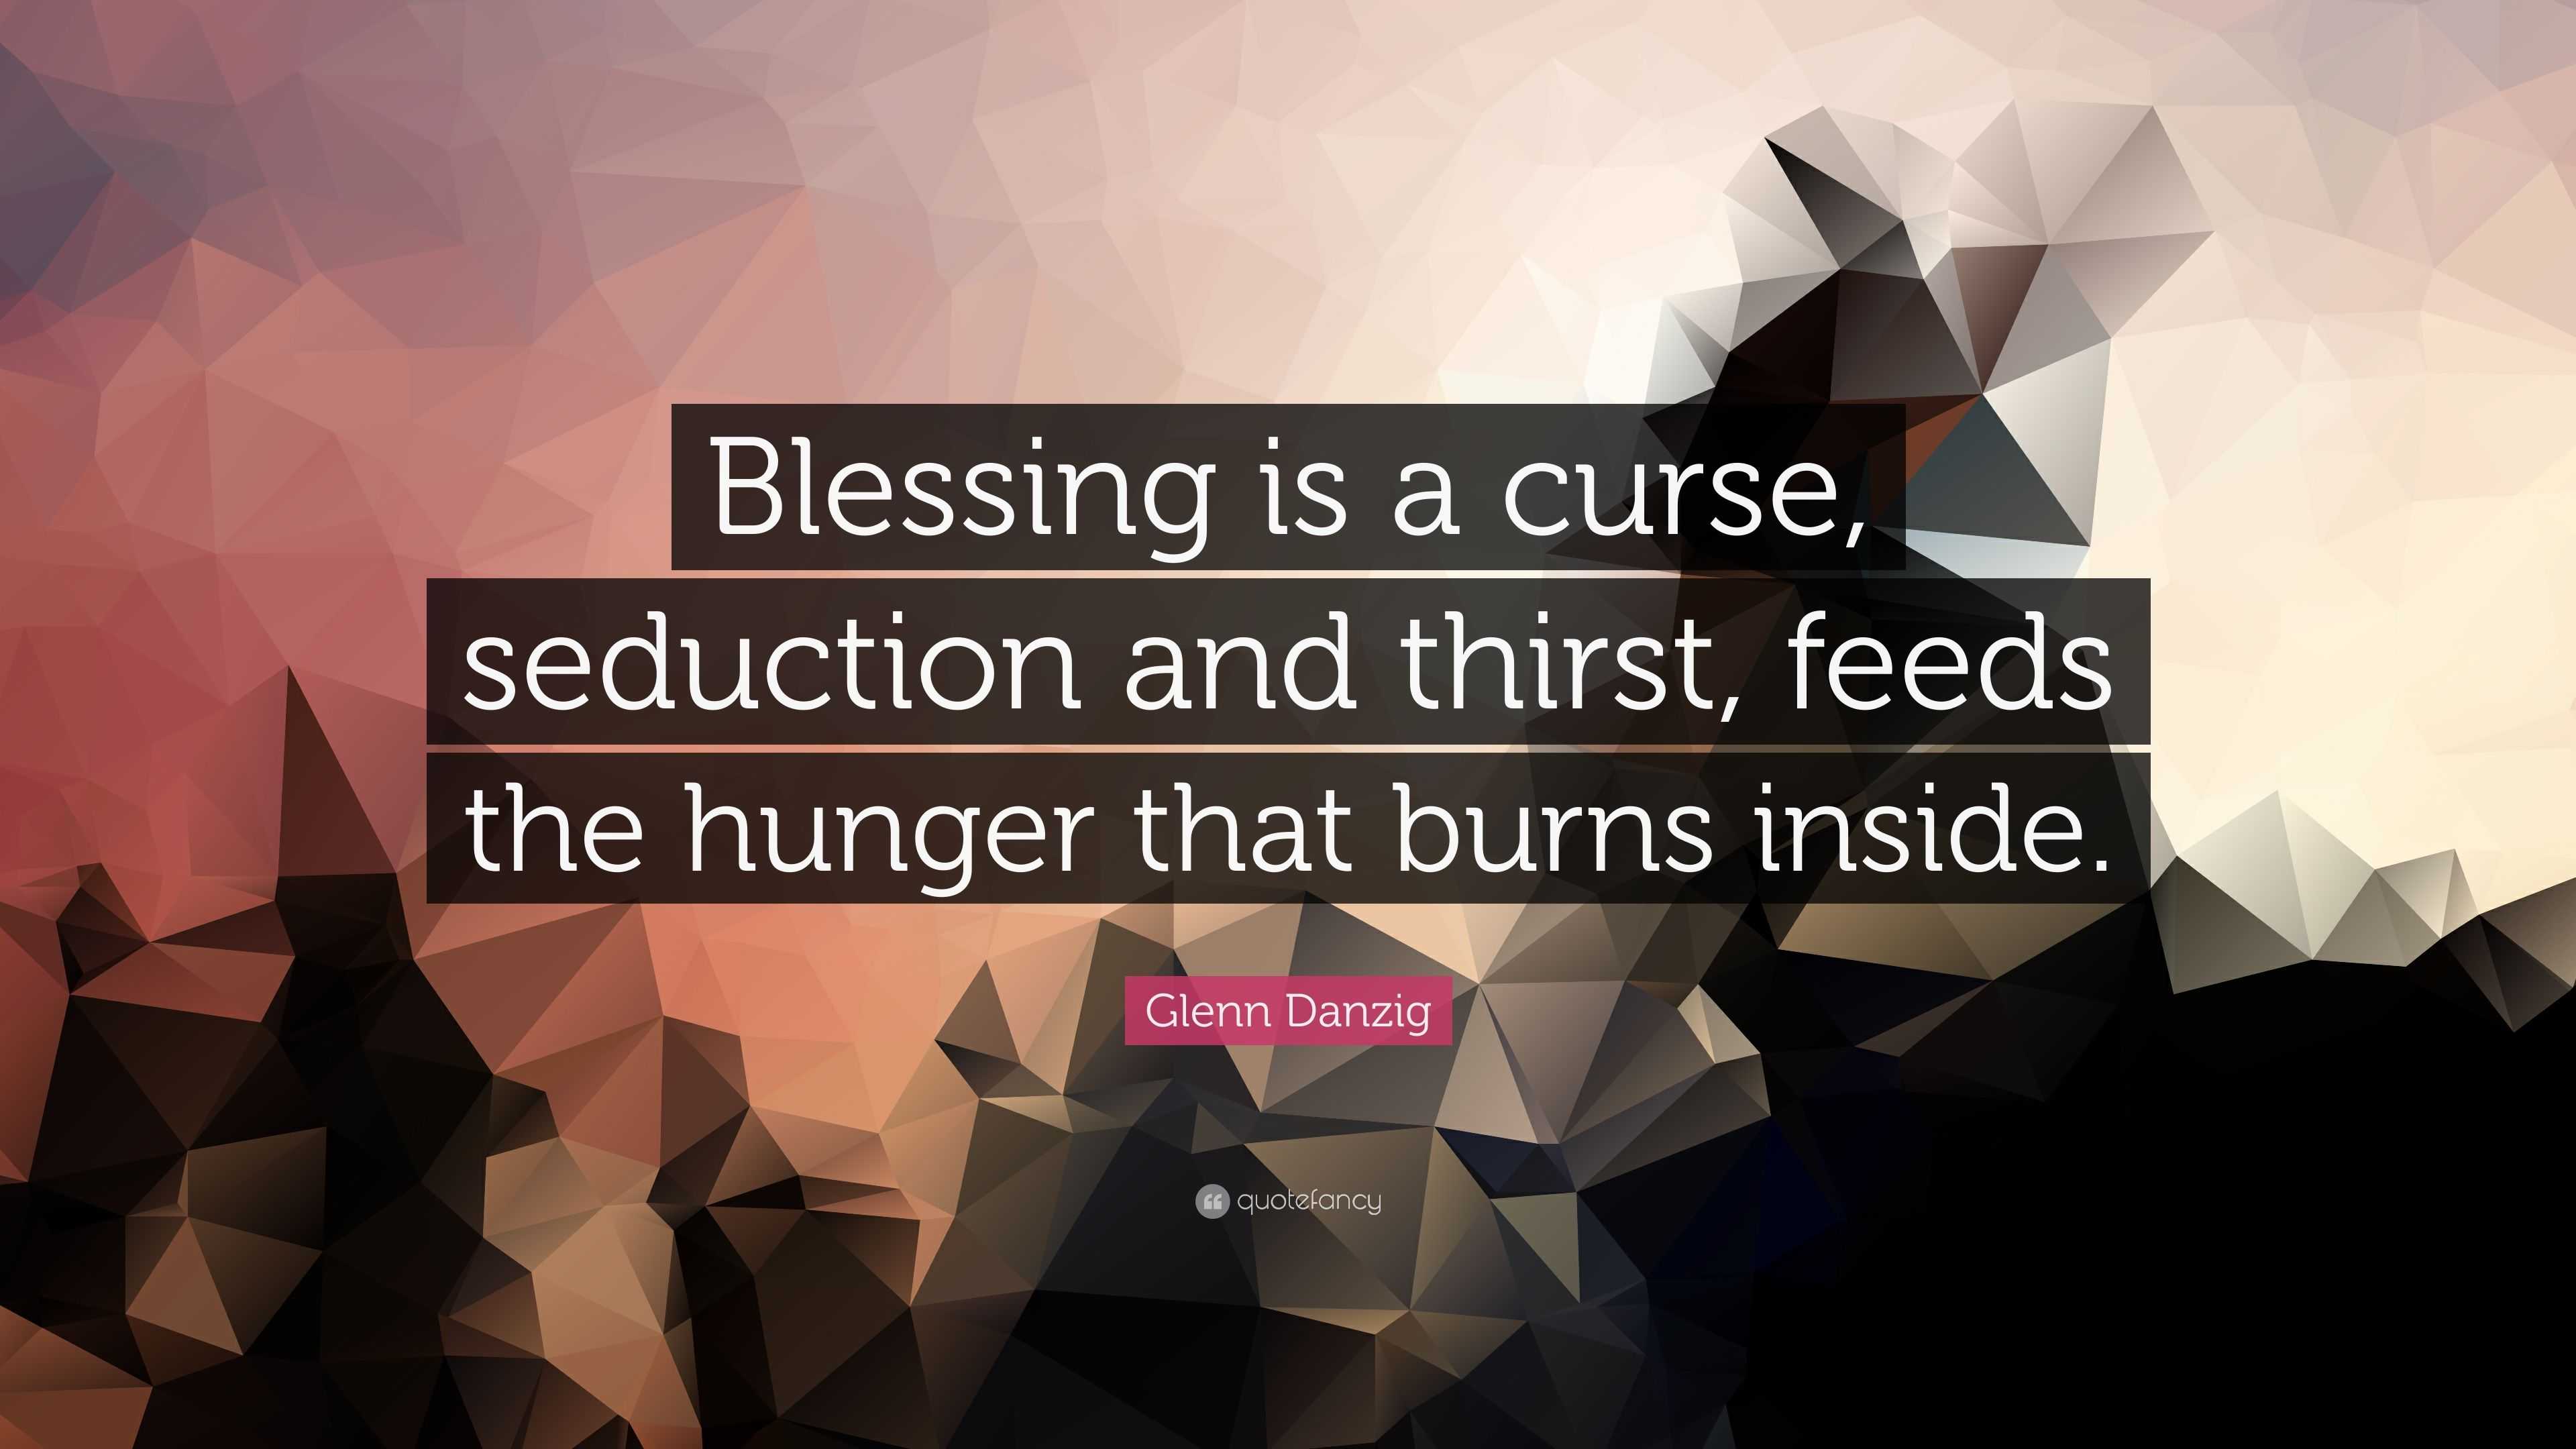 Glenn Danzig Quote: “Blessing is a curse, seduction and thirst